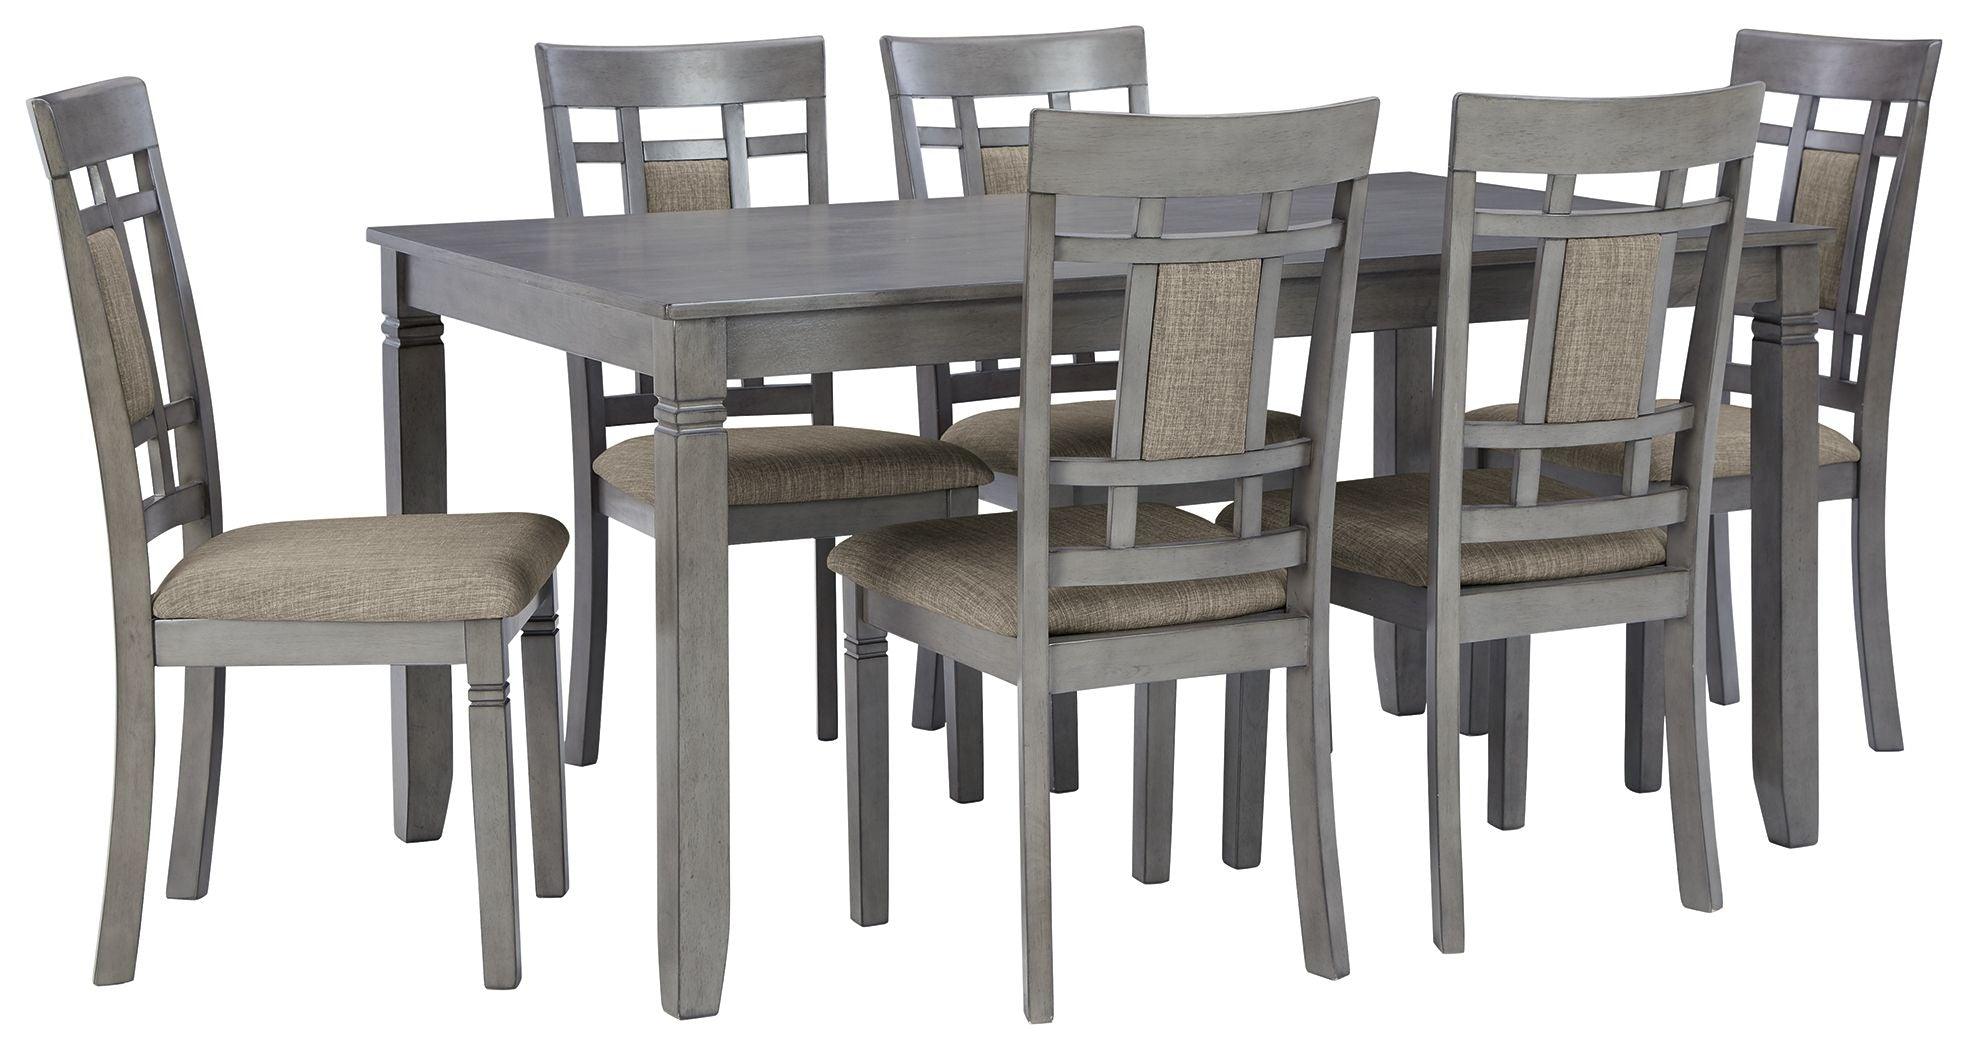 Ashley Furniture - Jayemyer - Charcoal Gray - Rect Drm Table Set (Set of 7) - 5th Avenue Furniture